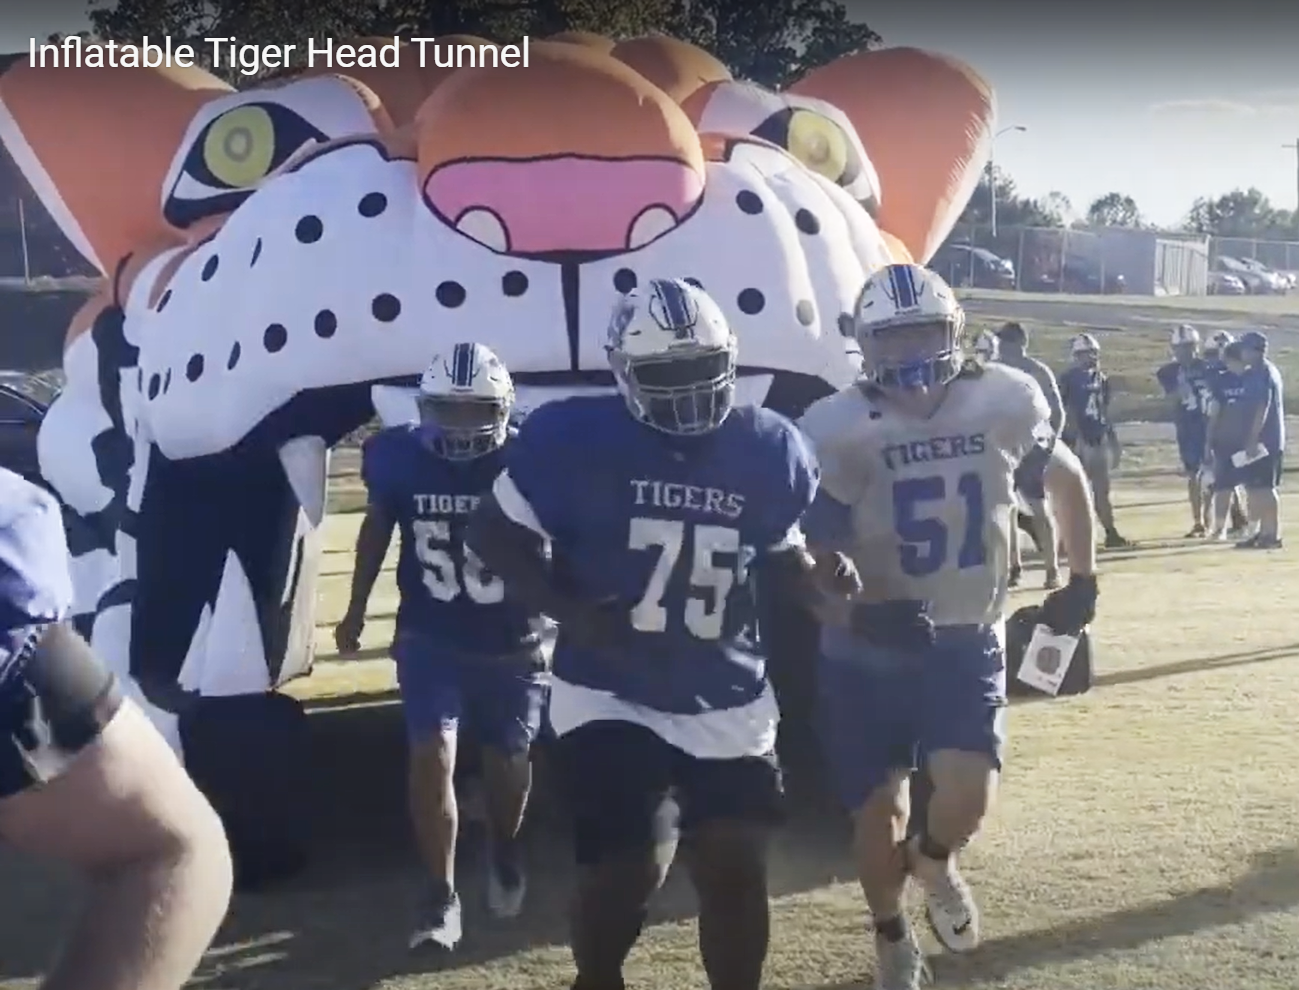 inflatable tiger head tunnel video